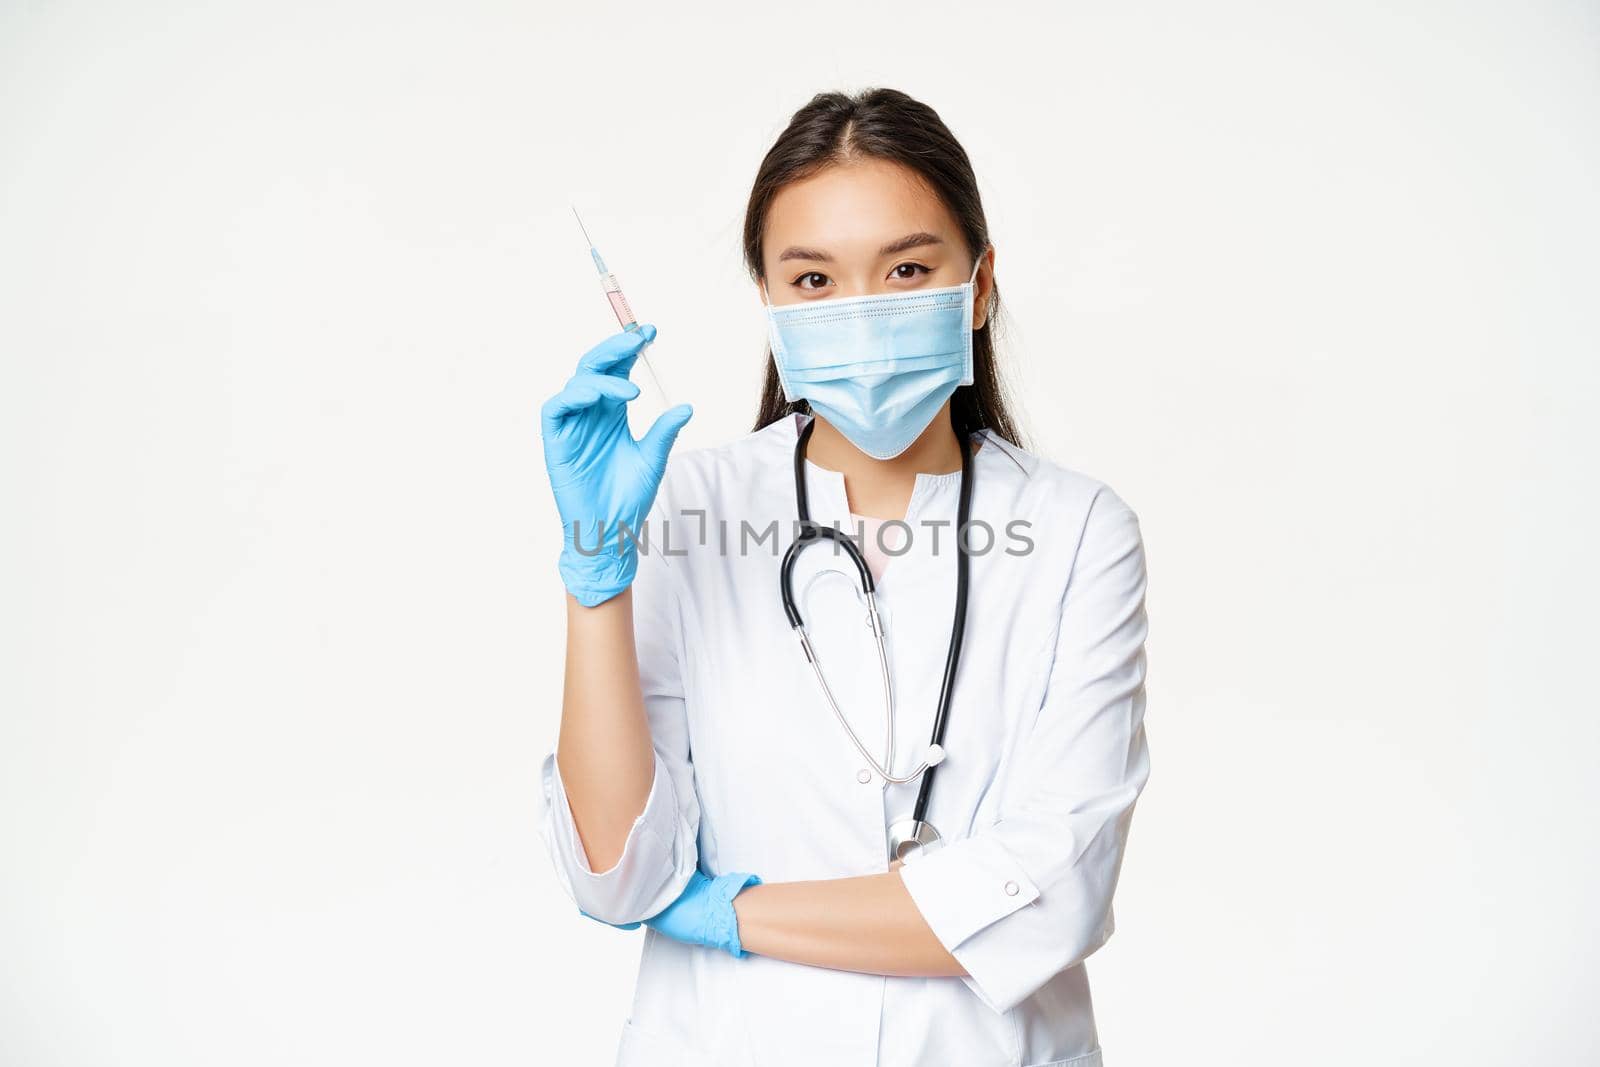 Vaccination and healthcare concept. Asian female doctor, nurse in medical face mask and gloves holding syringe with vaccine, white background.